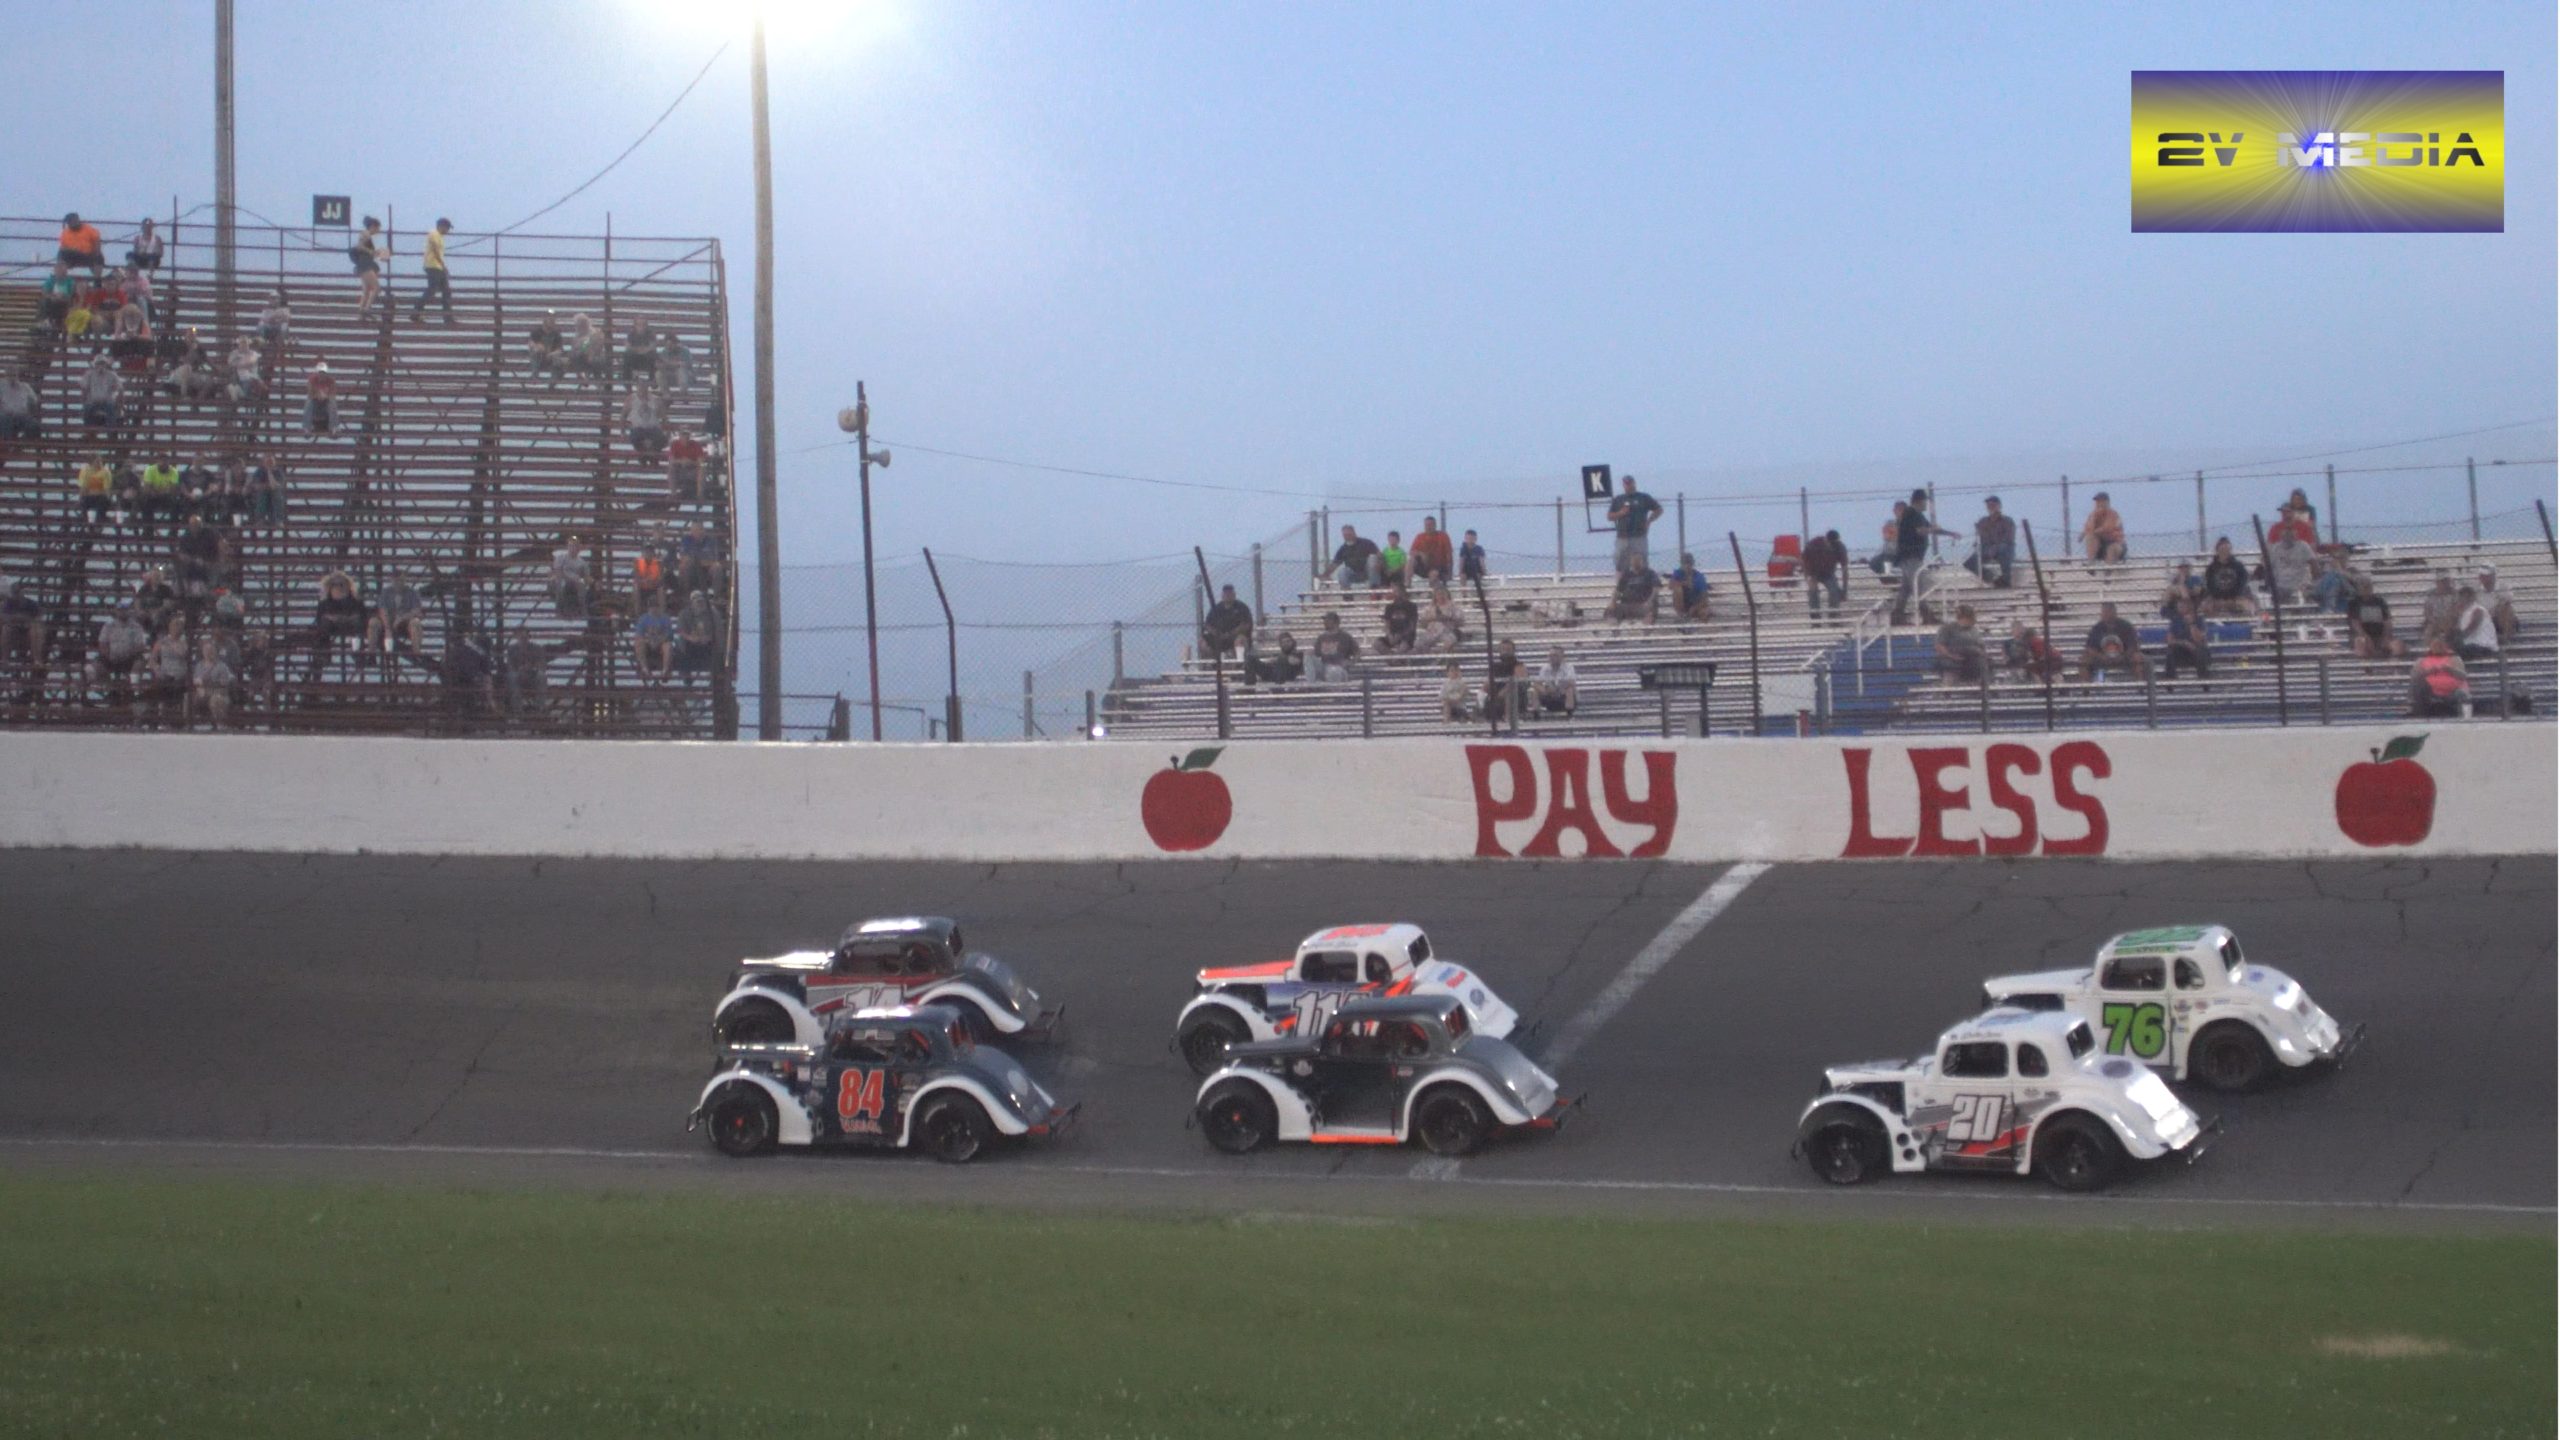 Anderson Speedway Racing Coverage 2V Media